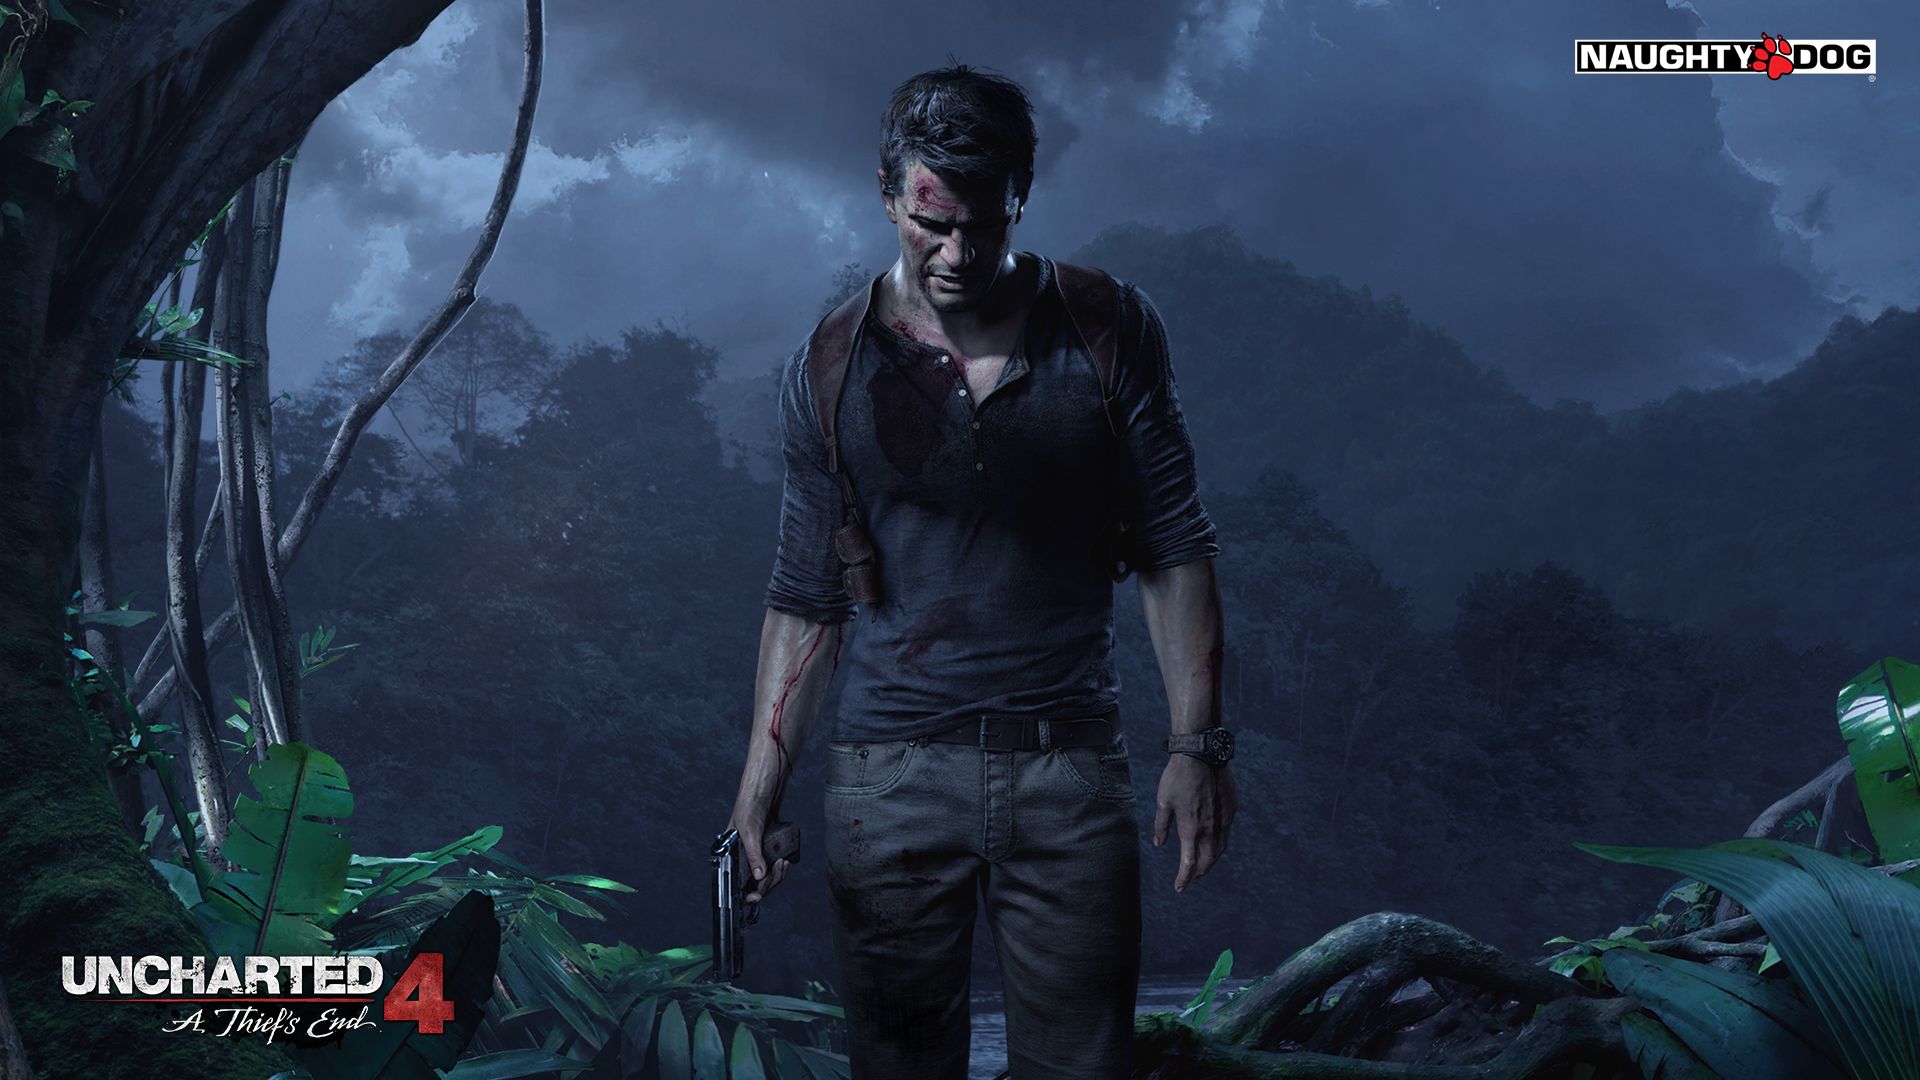 Uncharted 4 Gameplay Summons The Likeness of Michael Bay